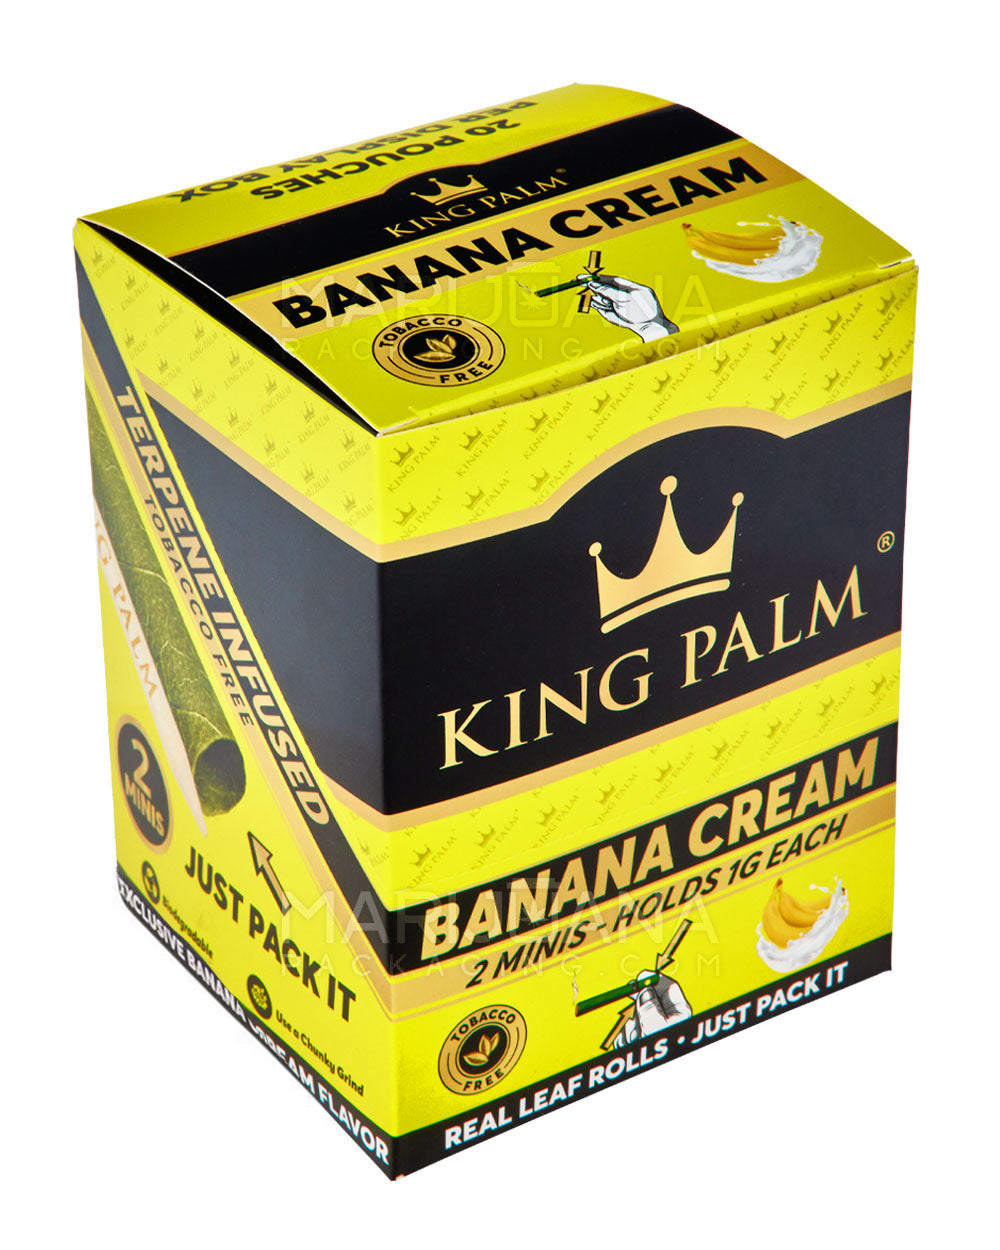 KING PALM | 'Retail Display' Natural Leaf Mini Rolls Blunt Wraps | 85mm - Banana Cream - 20 Count - 2